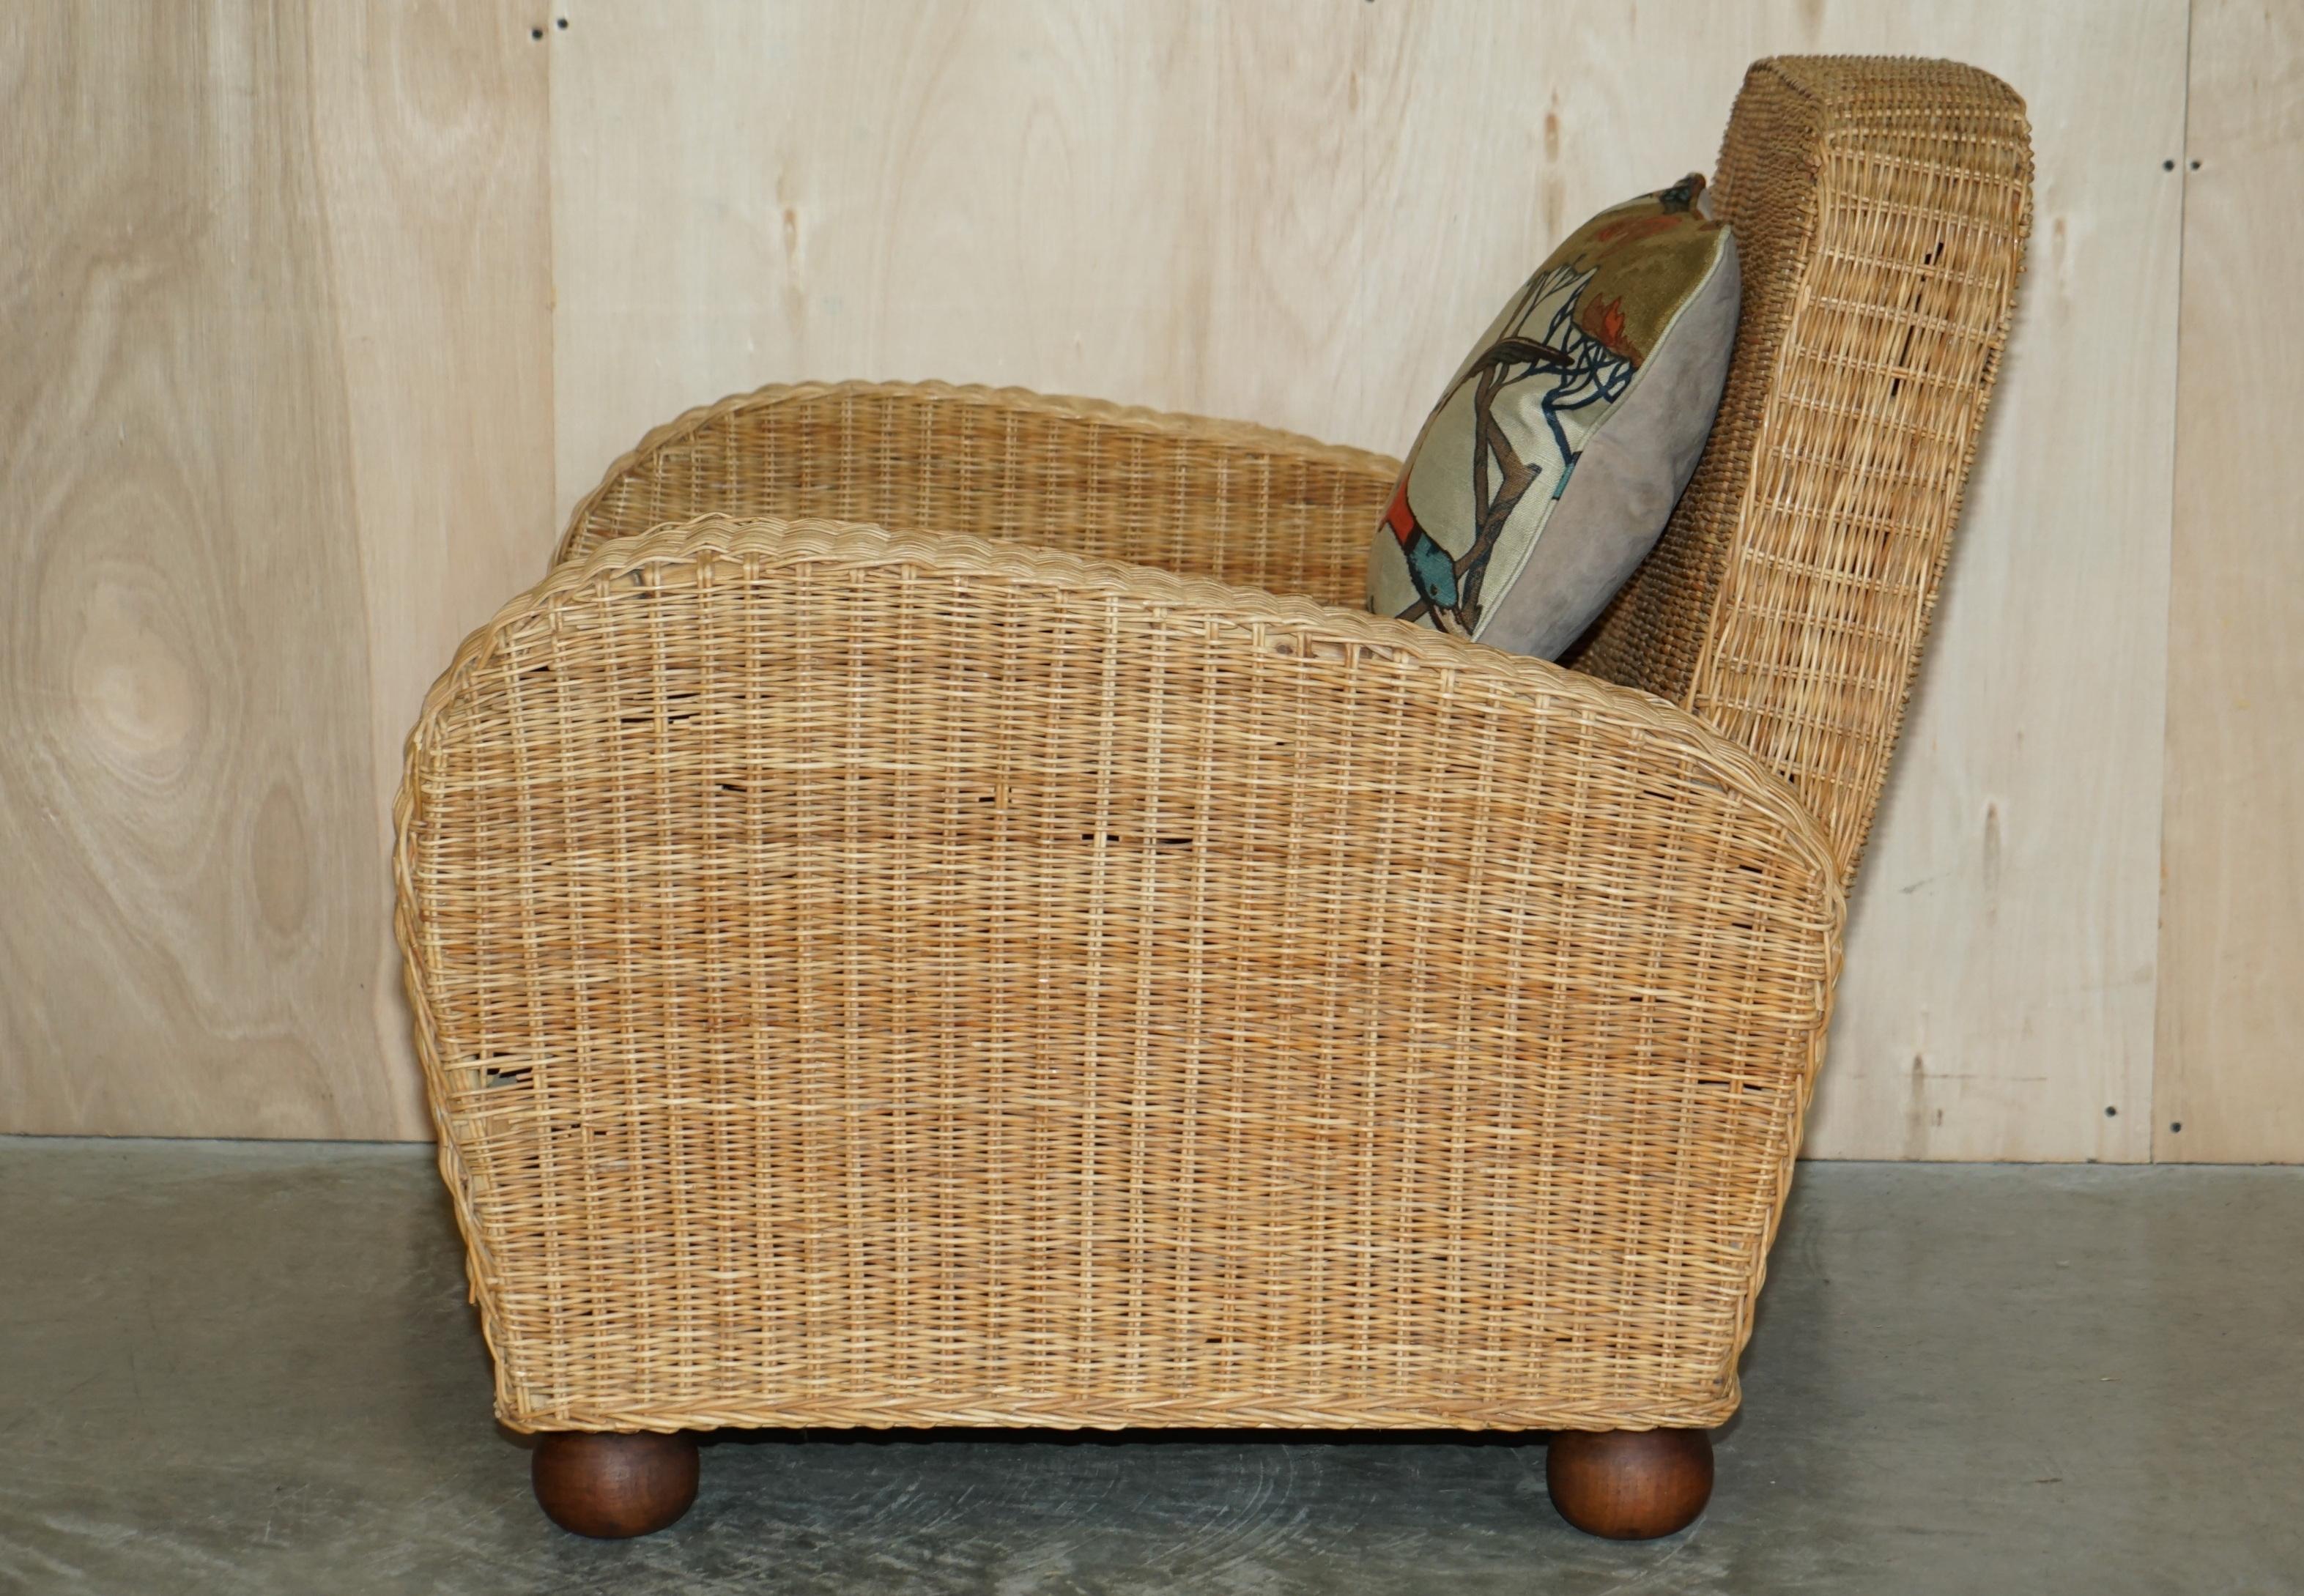 PAIR OF ART DECO STYLE WICKER CLUB ARMCHAIRS WiTH MULBERRY FLYING DUCKS CUSHIONS For Sale 3